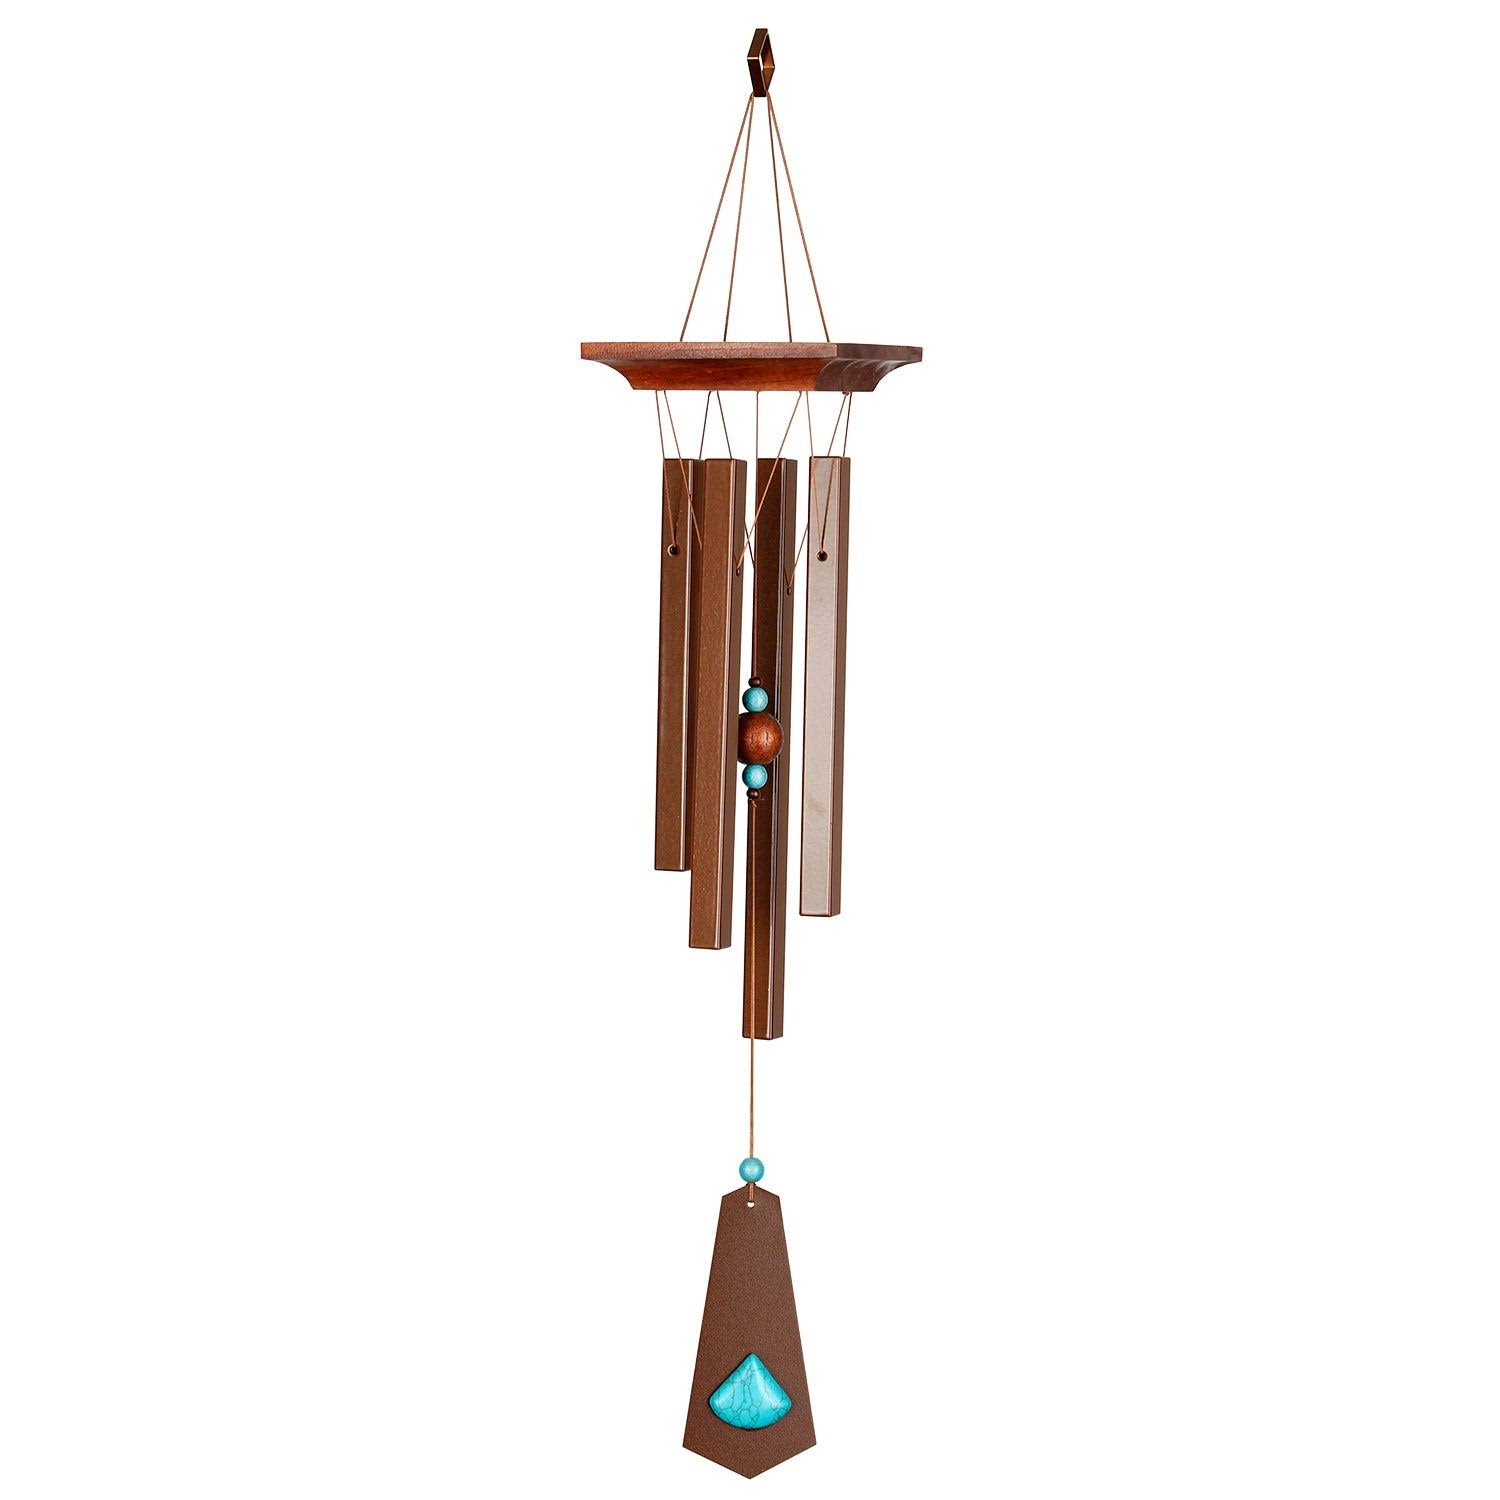 Woodstock Chimes Woodstock Rustic Chime - Turquoise